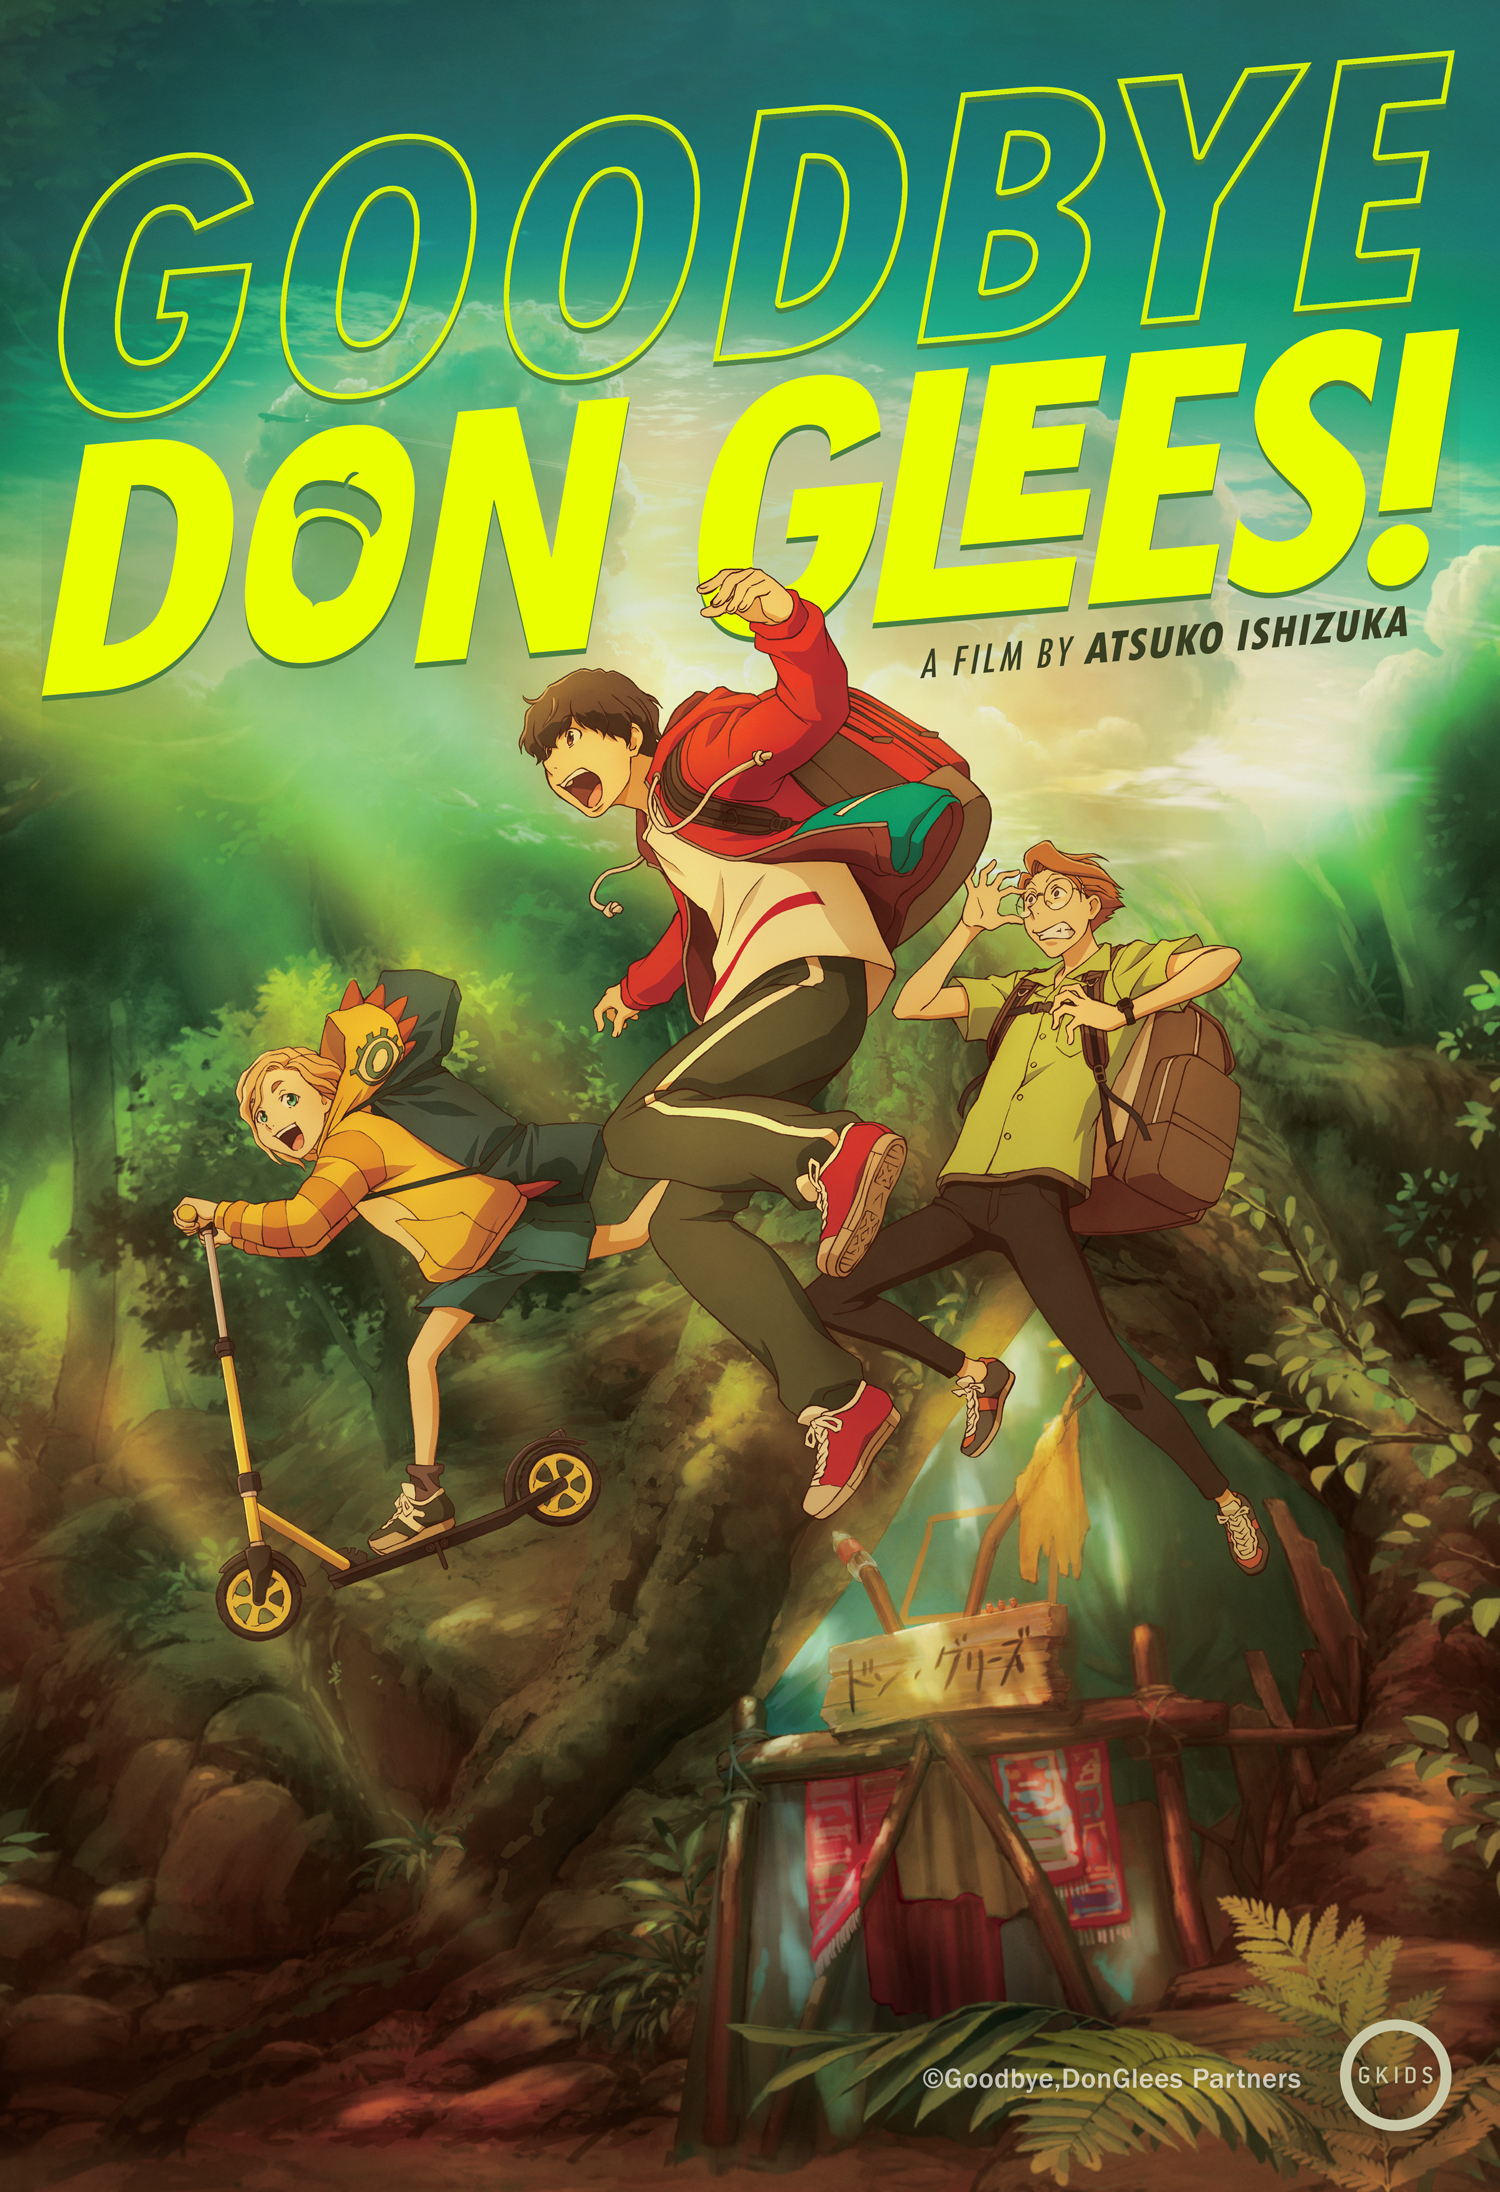 The theatrical movie poster for Goodbye, Don Glees! featuring the main characters - Roma, Toto, and Drop - gallivanting through the forest outside their secret clubhouse.